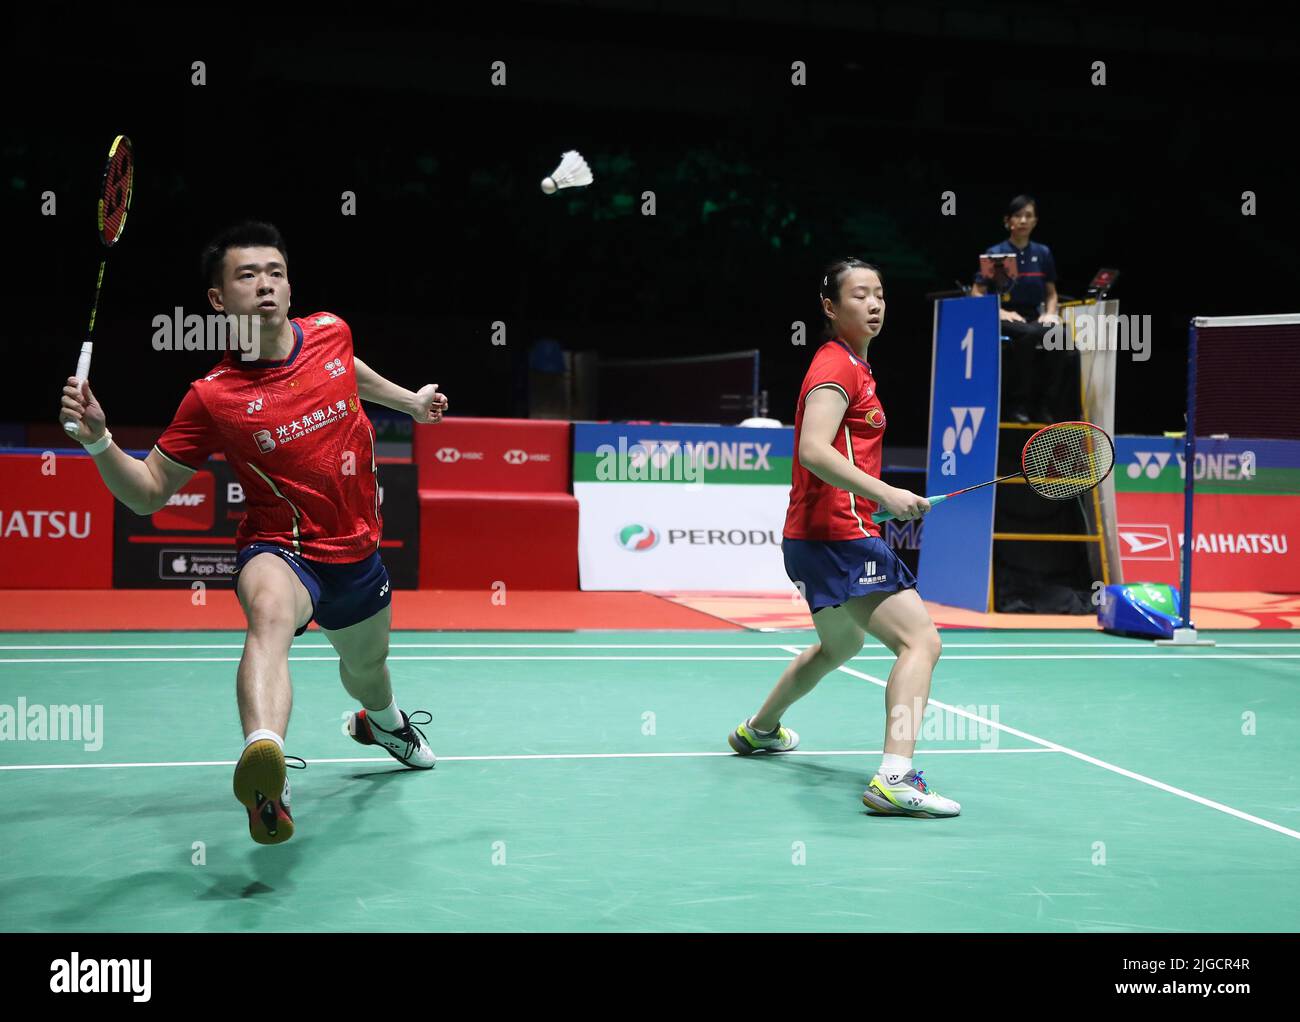 Zheng Si Wei (L) and Huang Ya Qiong of China compete against Yang Po Hsuan of Taiwan during the Mixed Doubles semi-finals match of the Perodua Malaysia Masters 2022 at Axiata Arena,